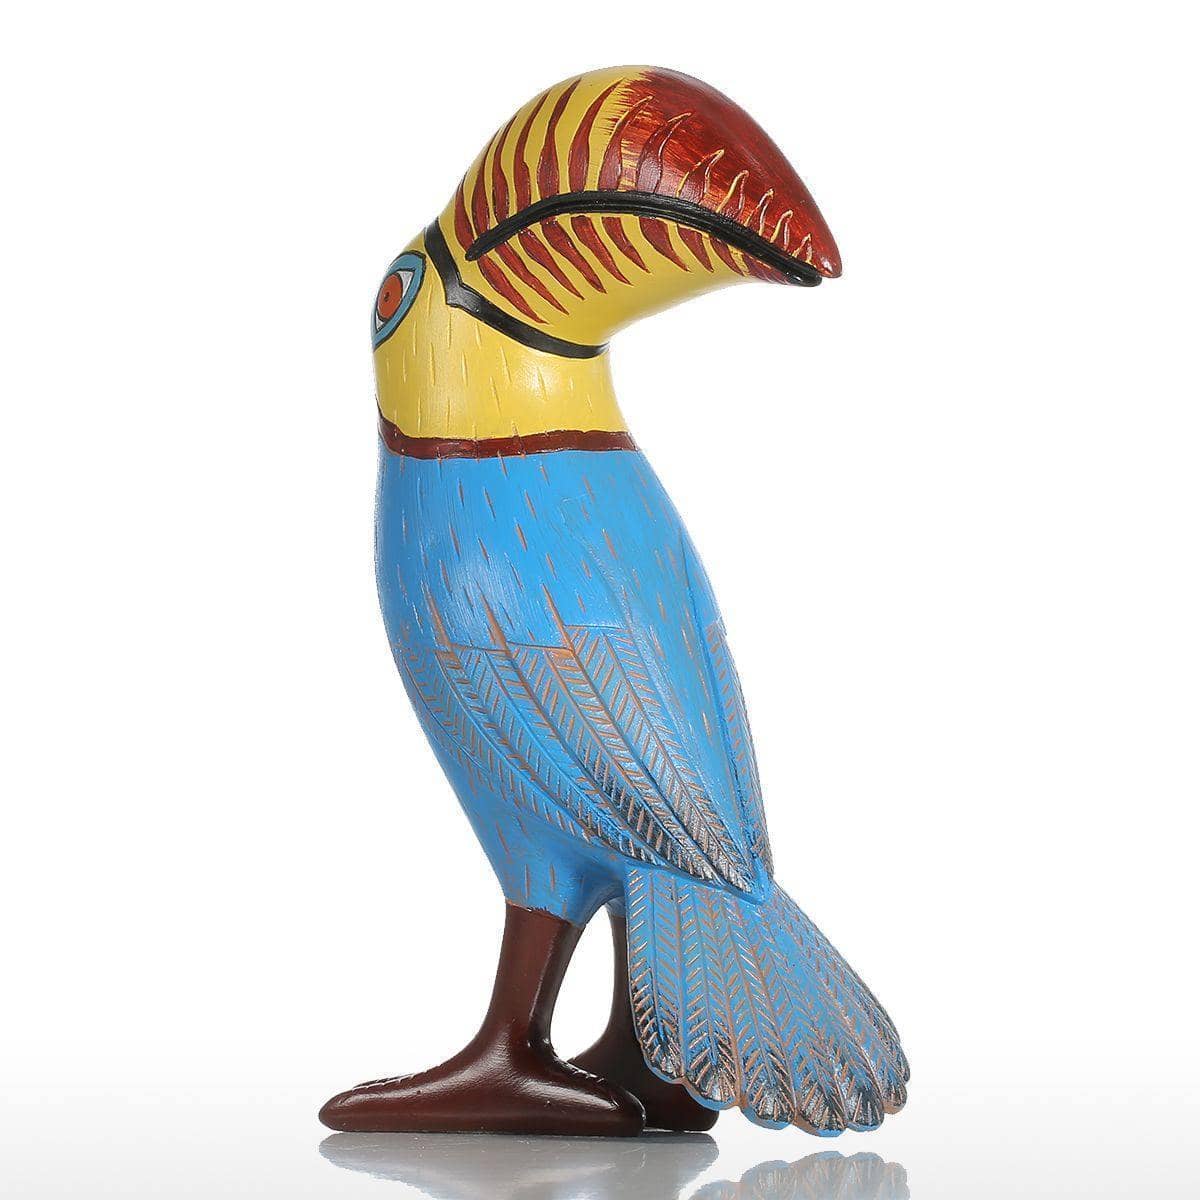 Toucan Bird Modern Decor - Tropical Vibes with Big Mouth - Stylish Home Accent